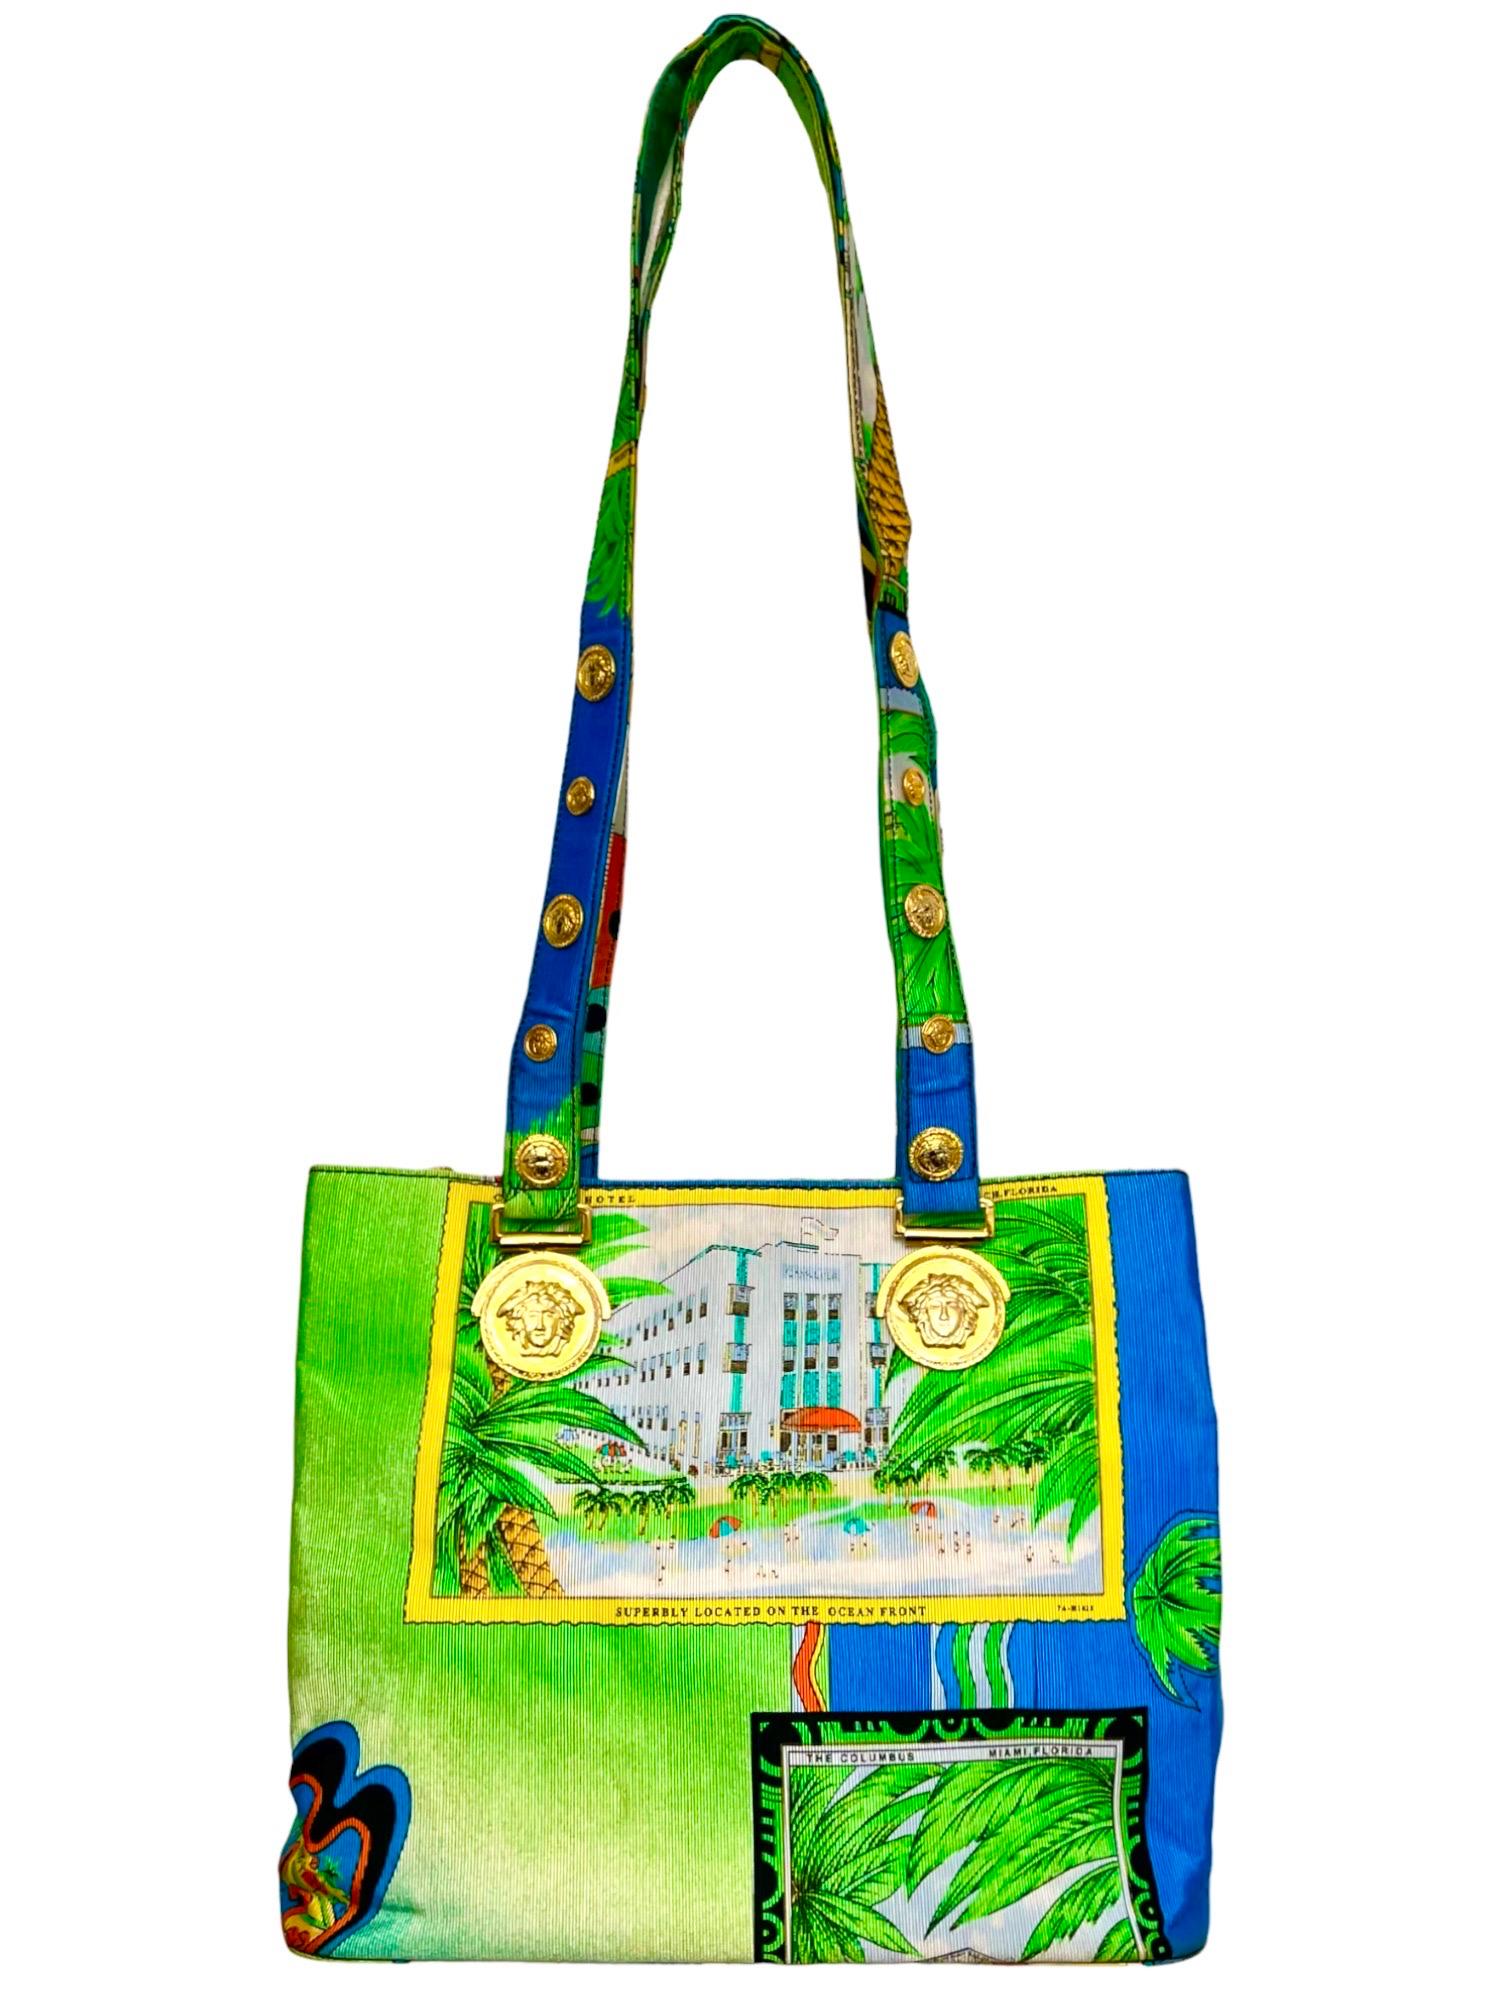 Gianni Versace Miami large silk shoulder bag from 1993 with Medusa Medallions,

South Beach Miami print of tropical vintage ocean front themes can be seen throughout with pop art Miami and Florida lettering.

Condition: Condition is excellent. There